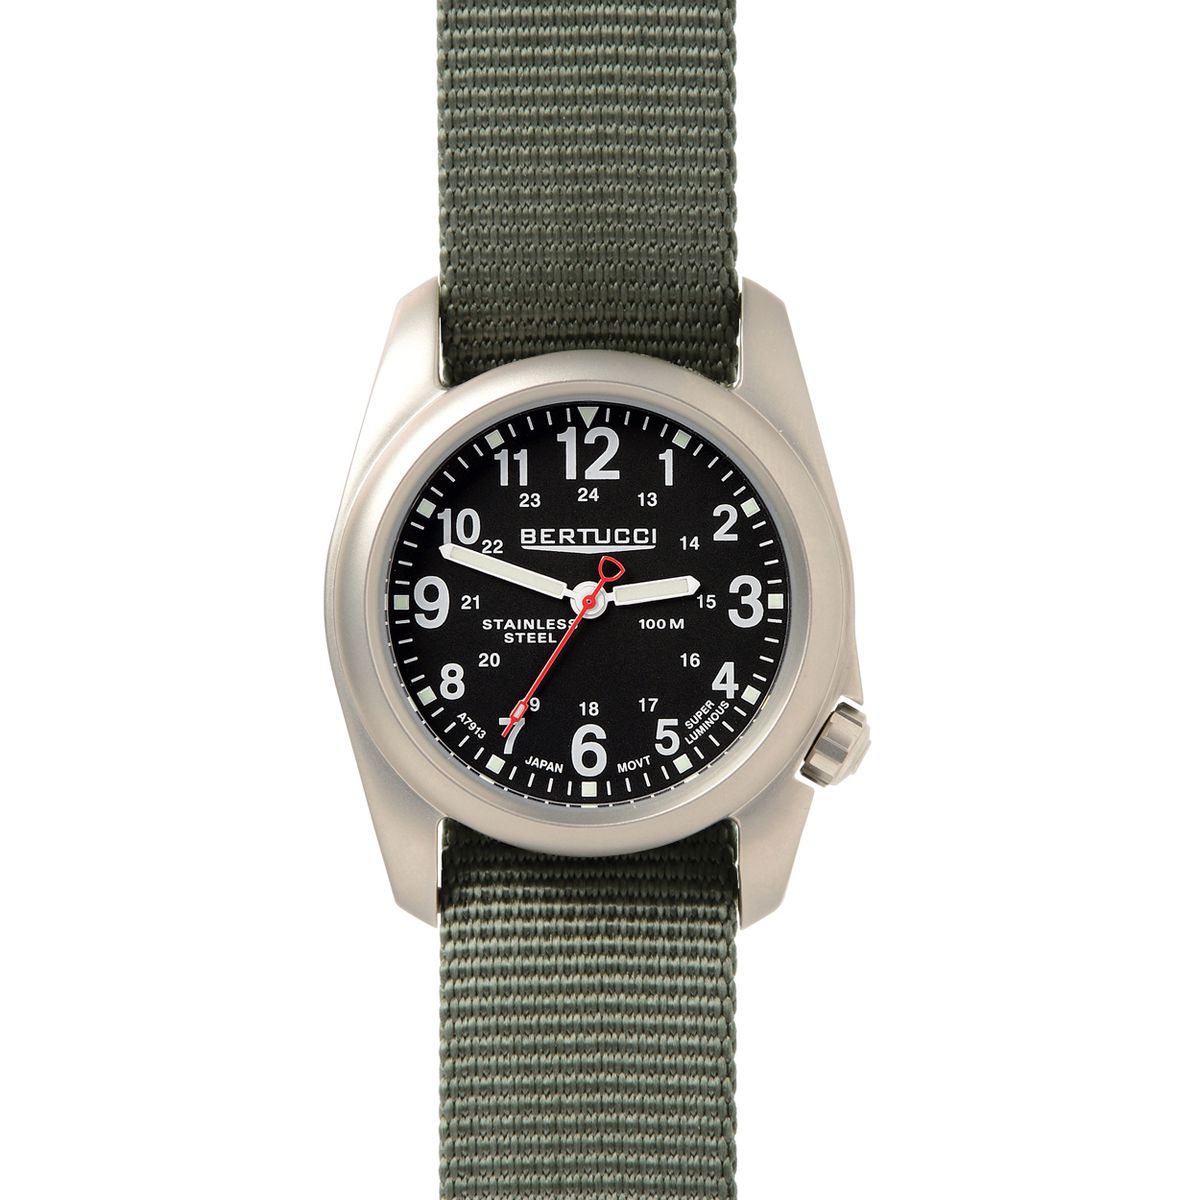 Bertucci Watches A-2S Field Watch Black\/Drab, One Size